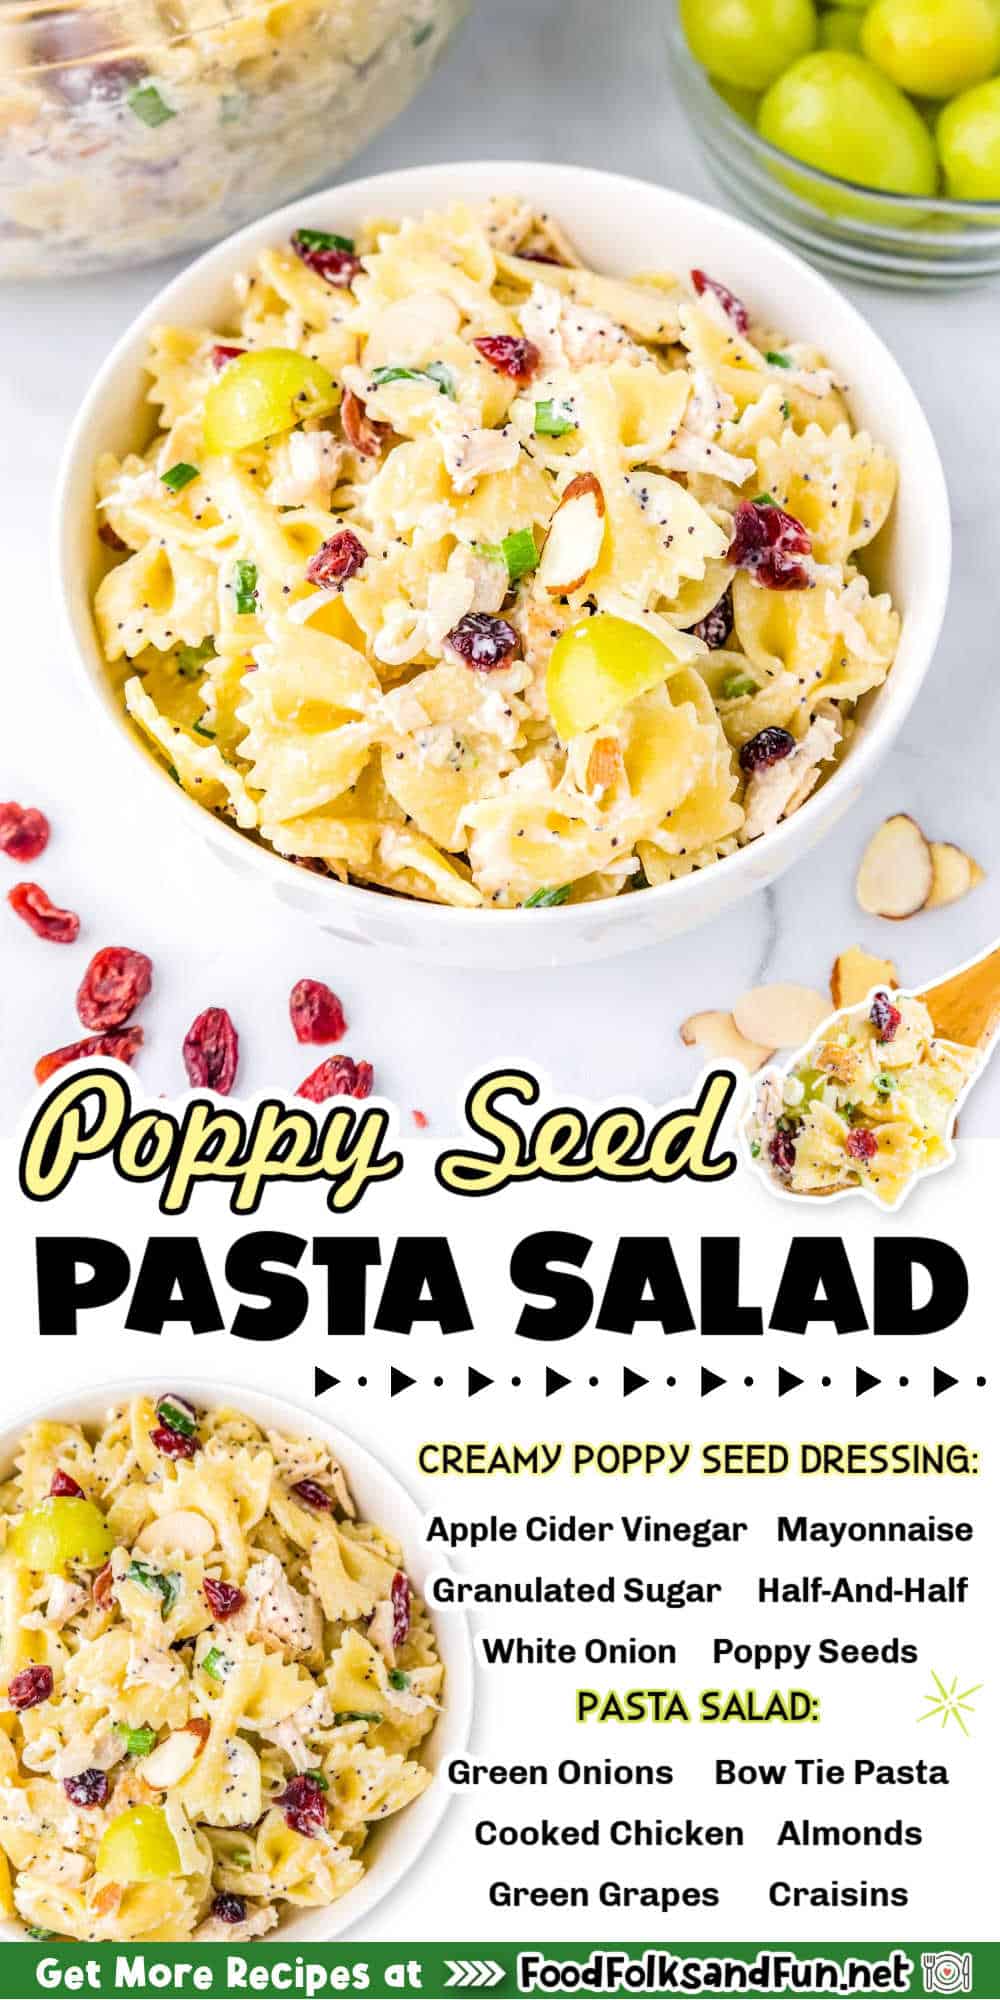 Poppy Seed Pasta Salad is an easy, make-ahead dinner that's perfect for hot summer nights when you don't feel like heating up the kitchen. via @foodfolksandfun